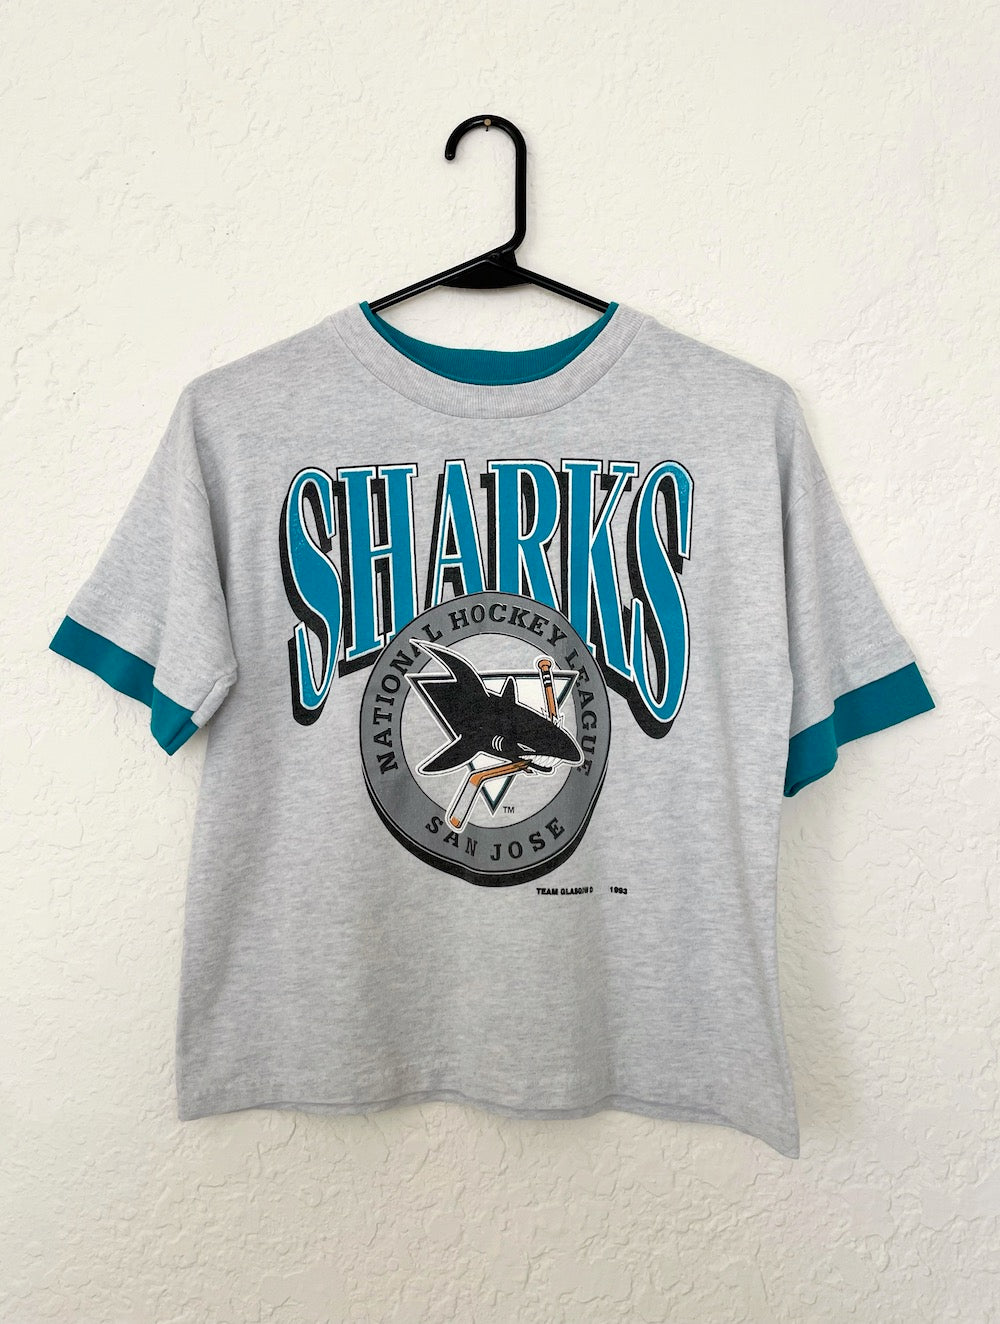 Vintage 90s Grey and Teal San Jose Sharks Tee -- Size Extra Small/Small